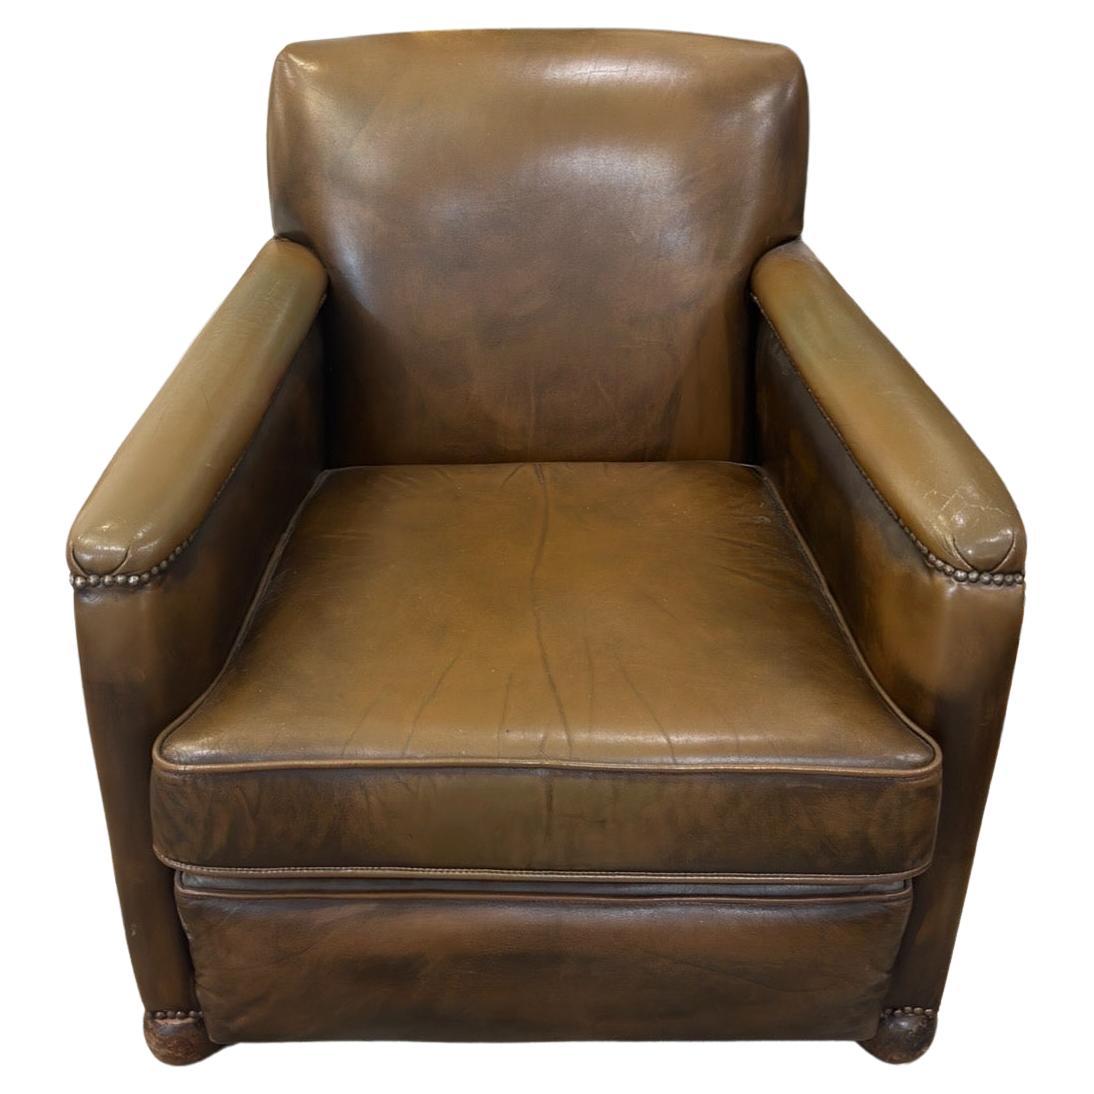 Discovered recently in Northern France, this vintage leather club chair makes for a very comfortable and stylish addition to a living or office area. Upholstered with dark brown leather and includes nailhead trim along the front. Wooden feet and